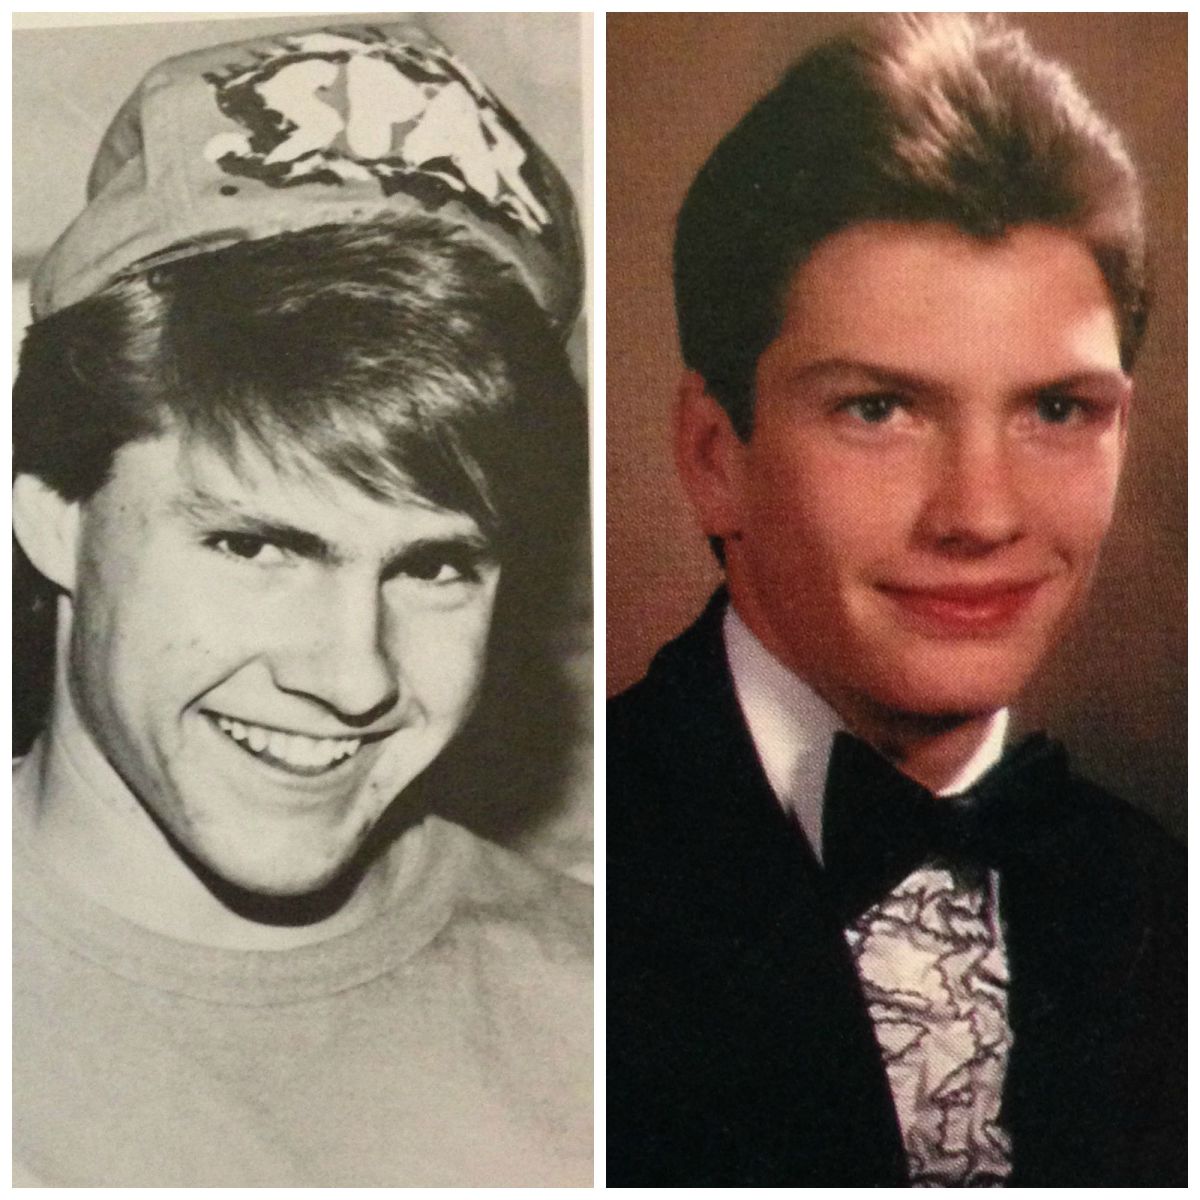 From left: Byran's yearbook photo; Johnny's senior picture.